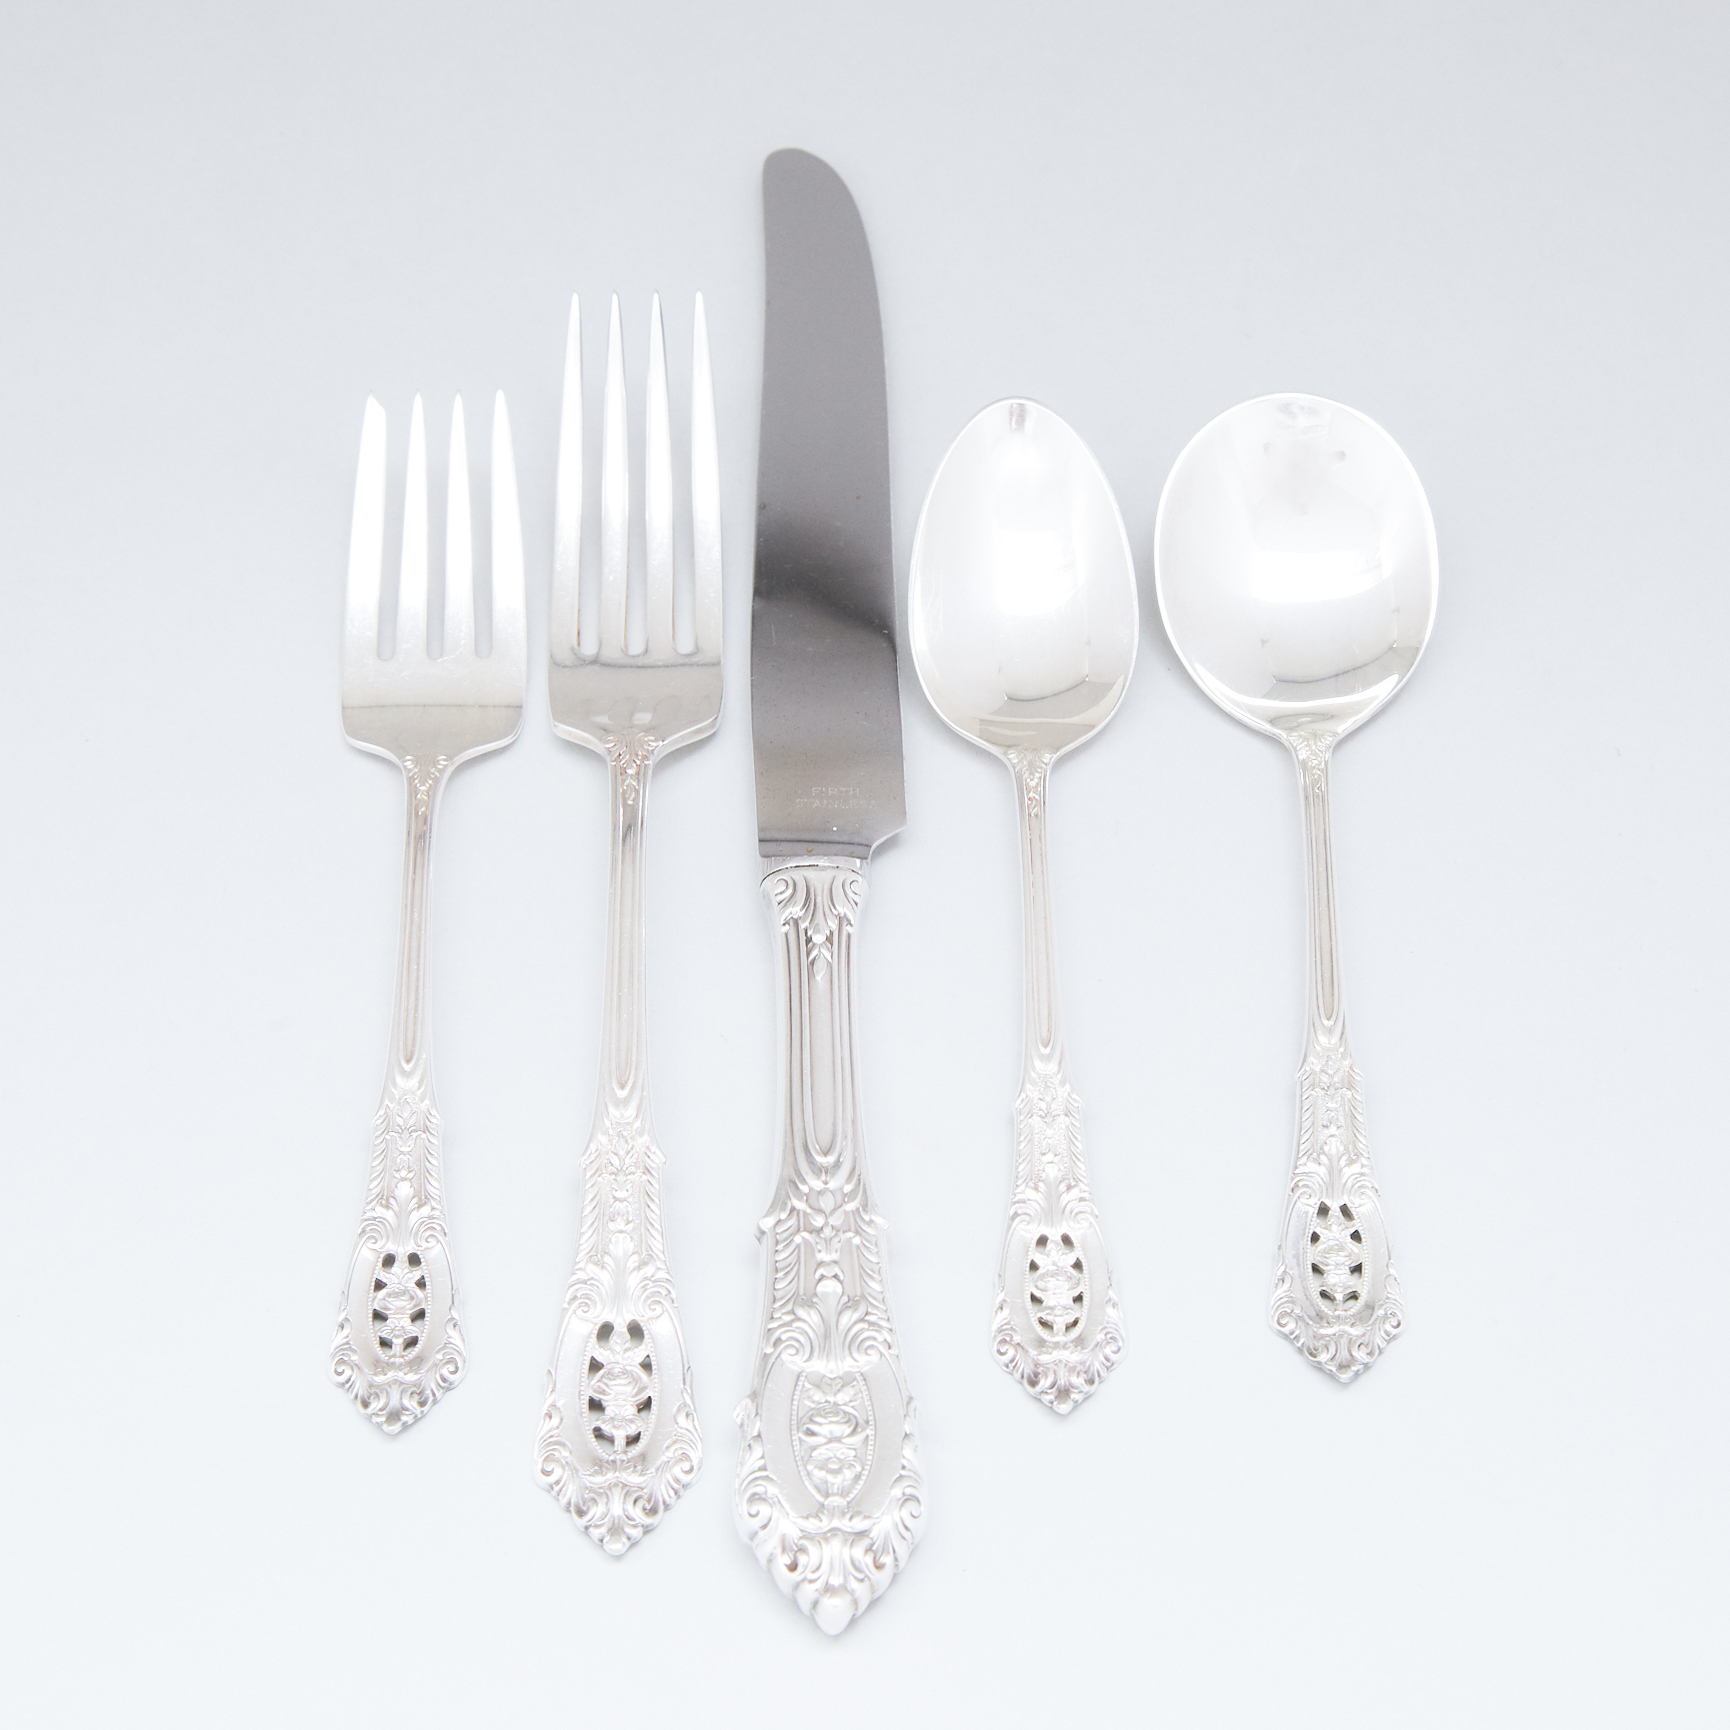 American Silver 'Rosepoint' Pattern Flatware Service, Wallace Silversmiths, Wallingford, Ct., 20th century